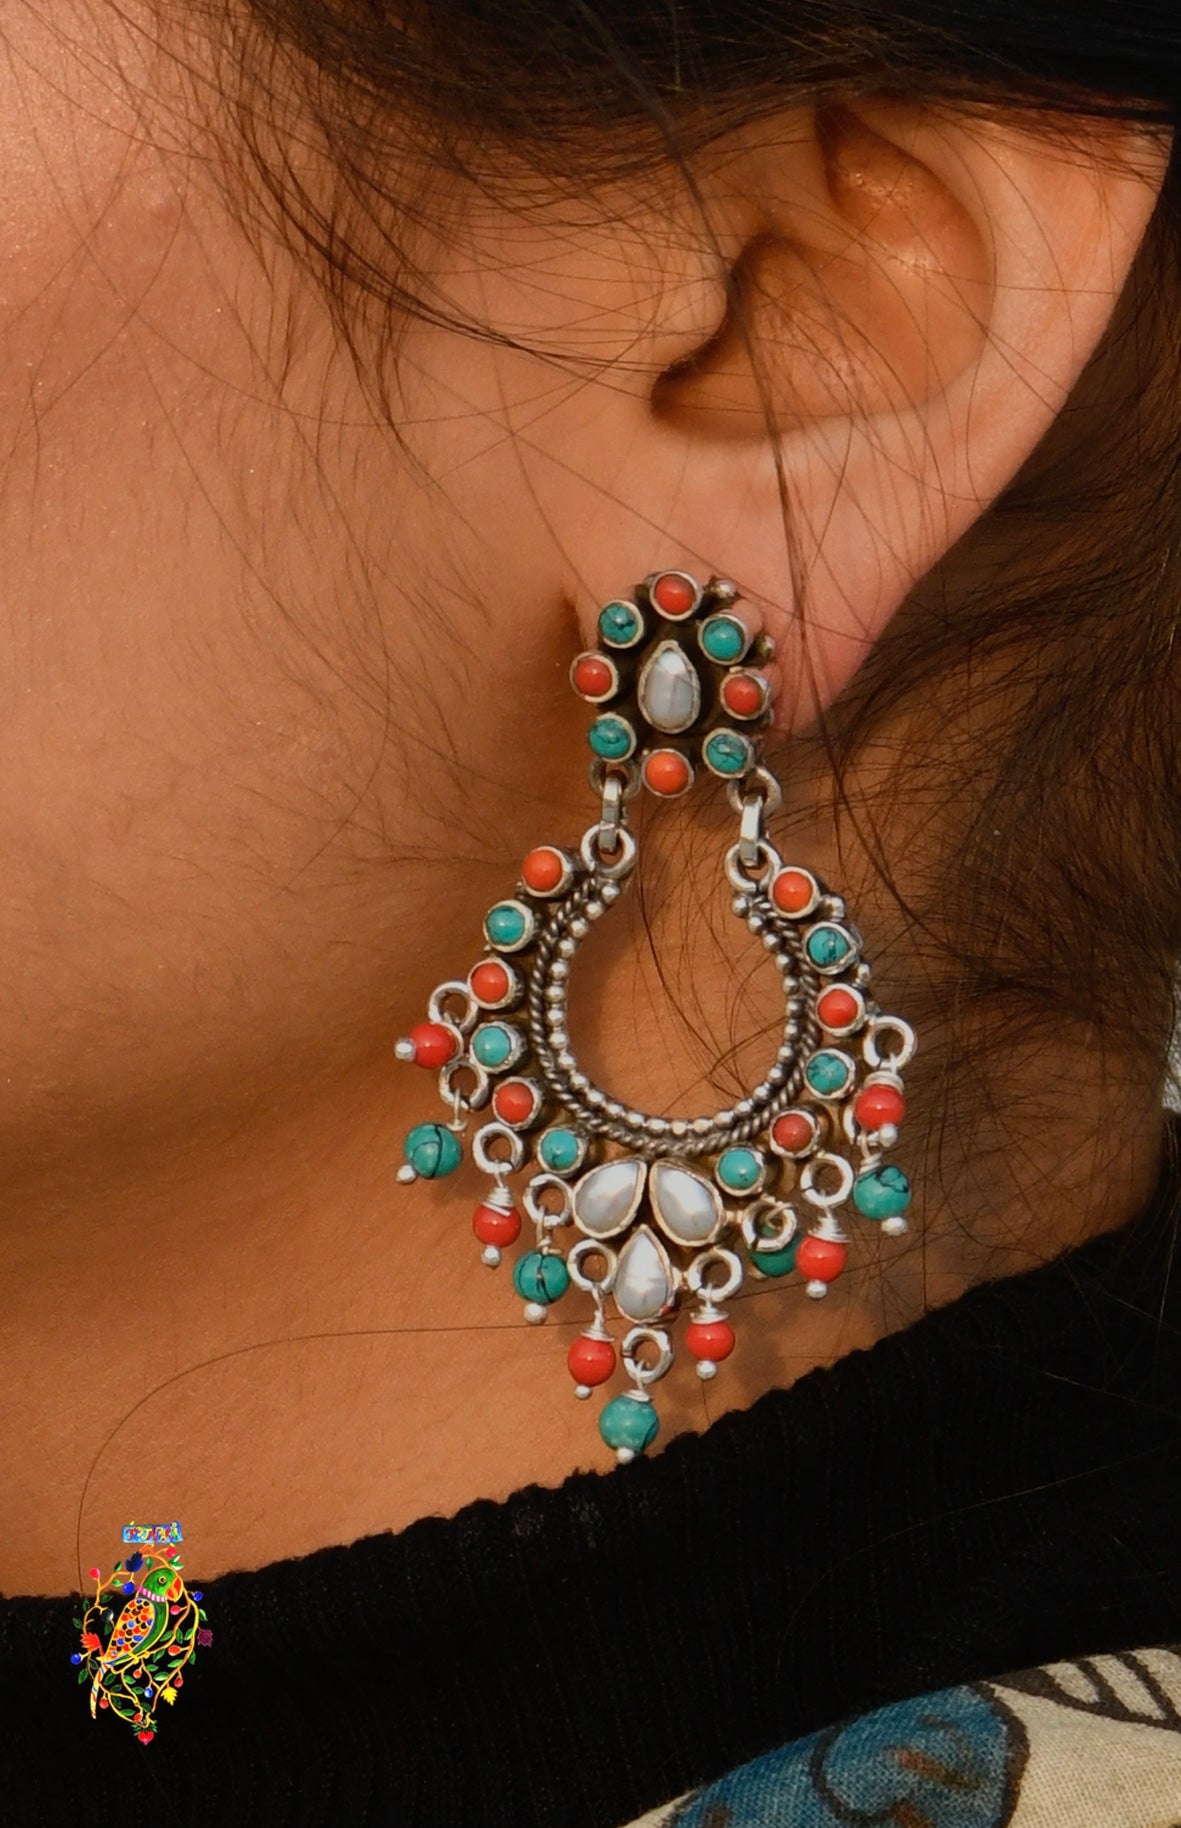 Turquoise and Coral Chaand Bali Earrings